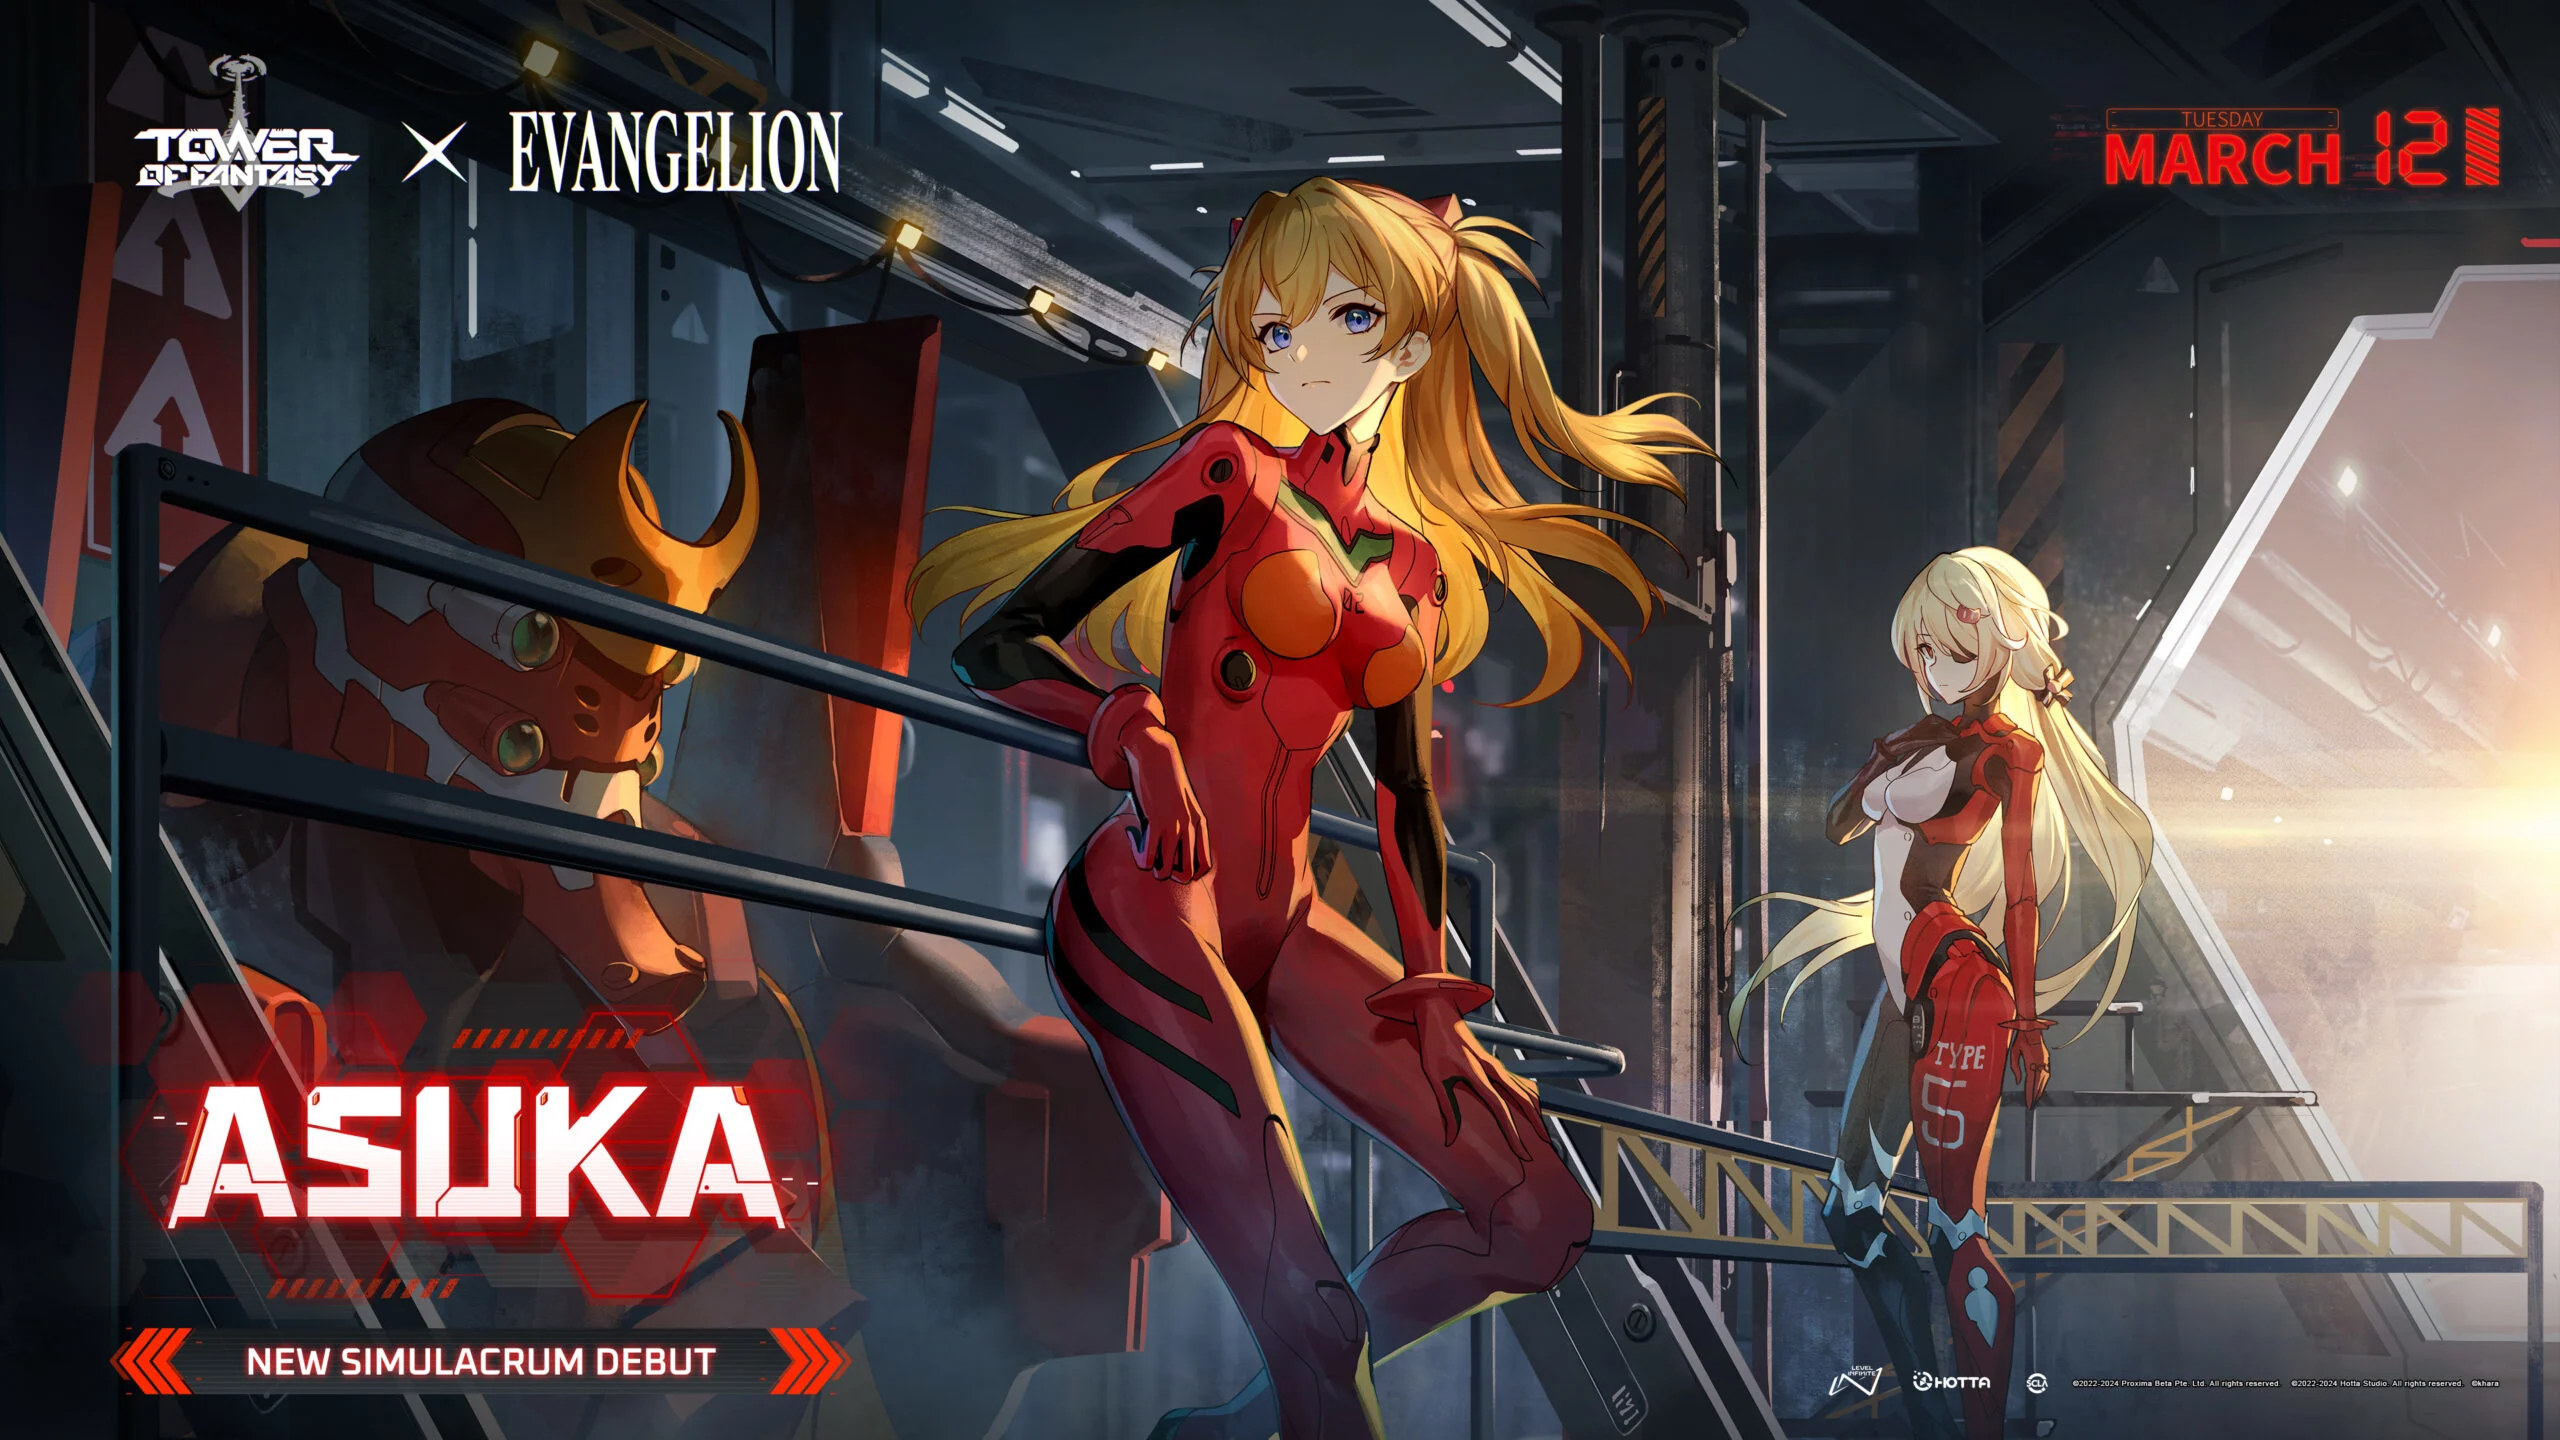 Tower of Fantasy Expands with New Simulacrum Asuka in Evangelion Collaboration 2